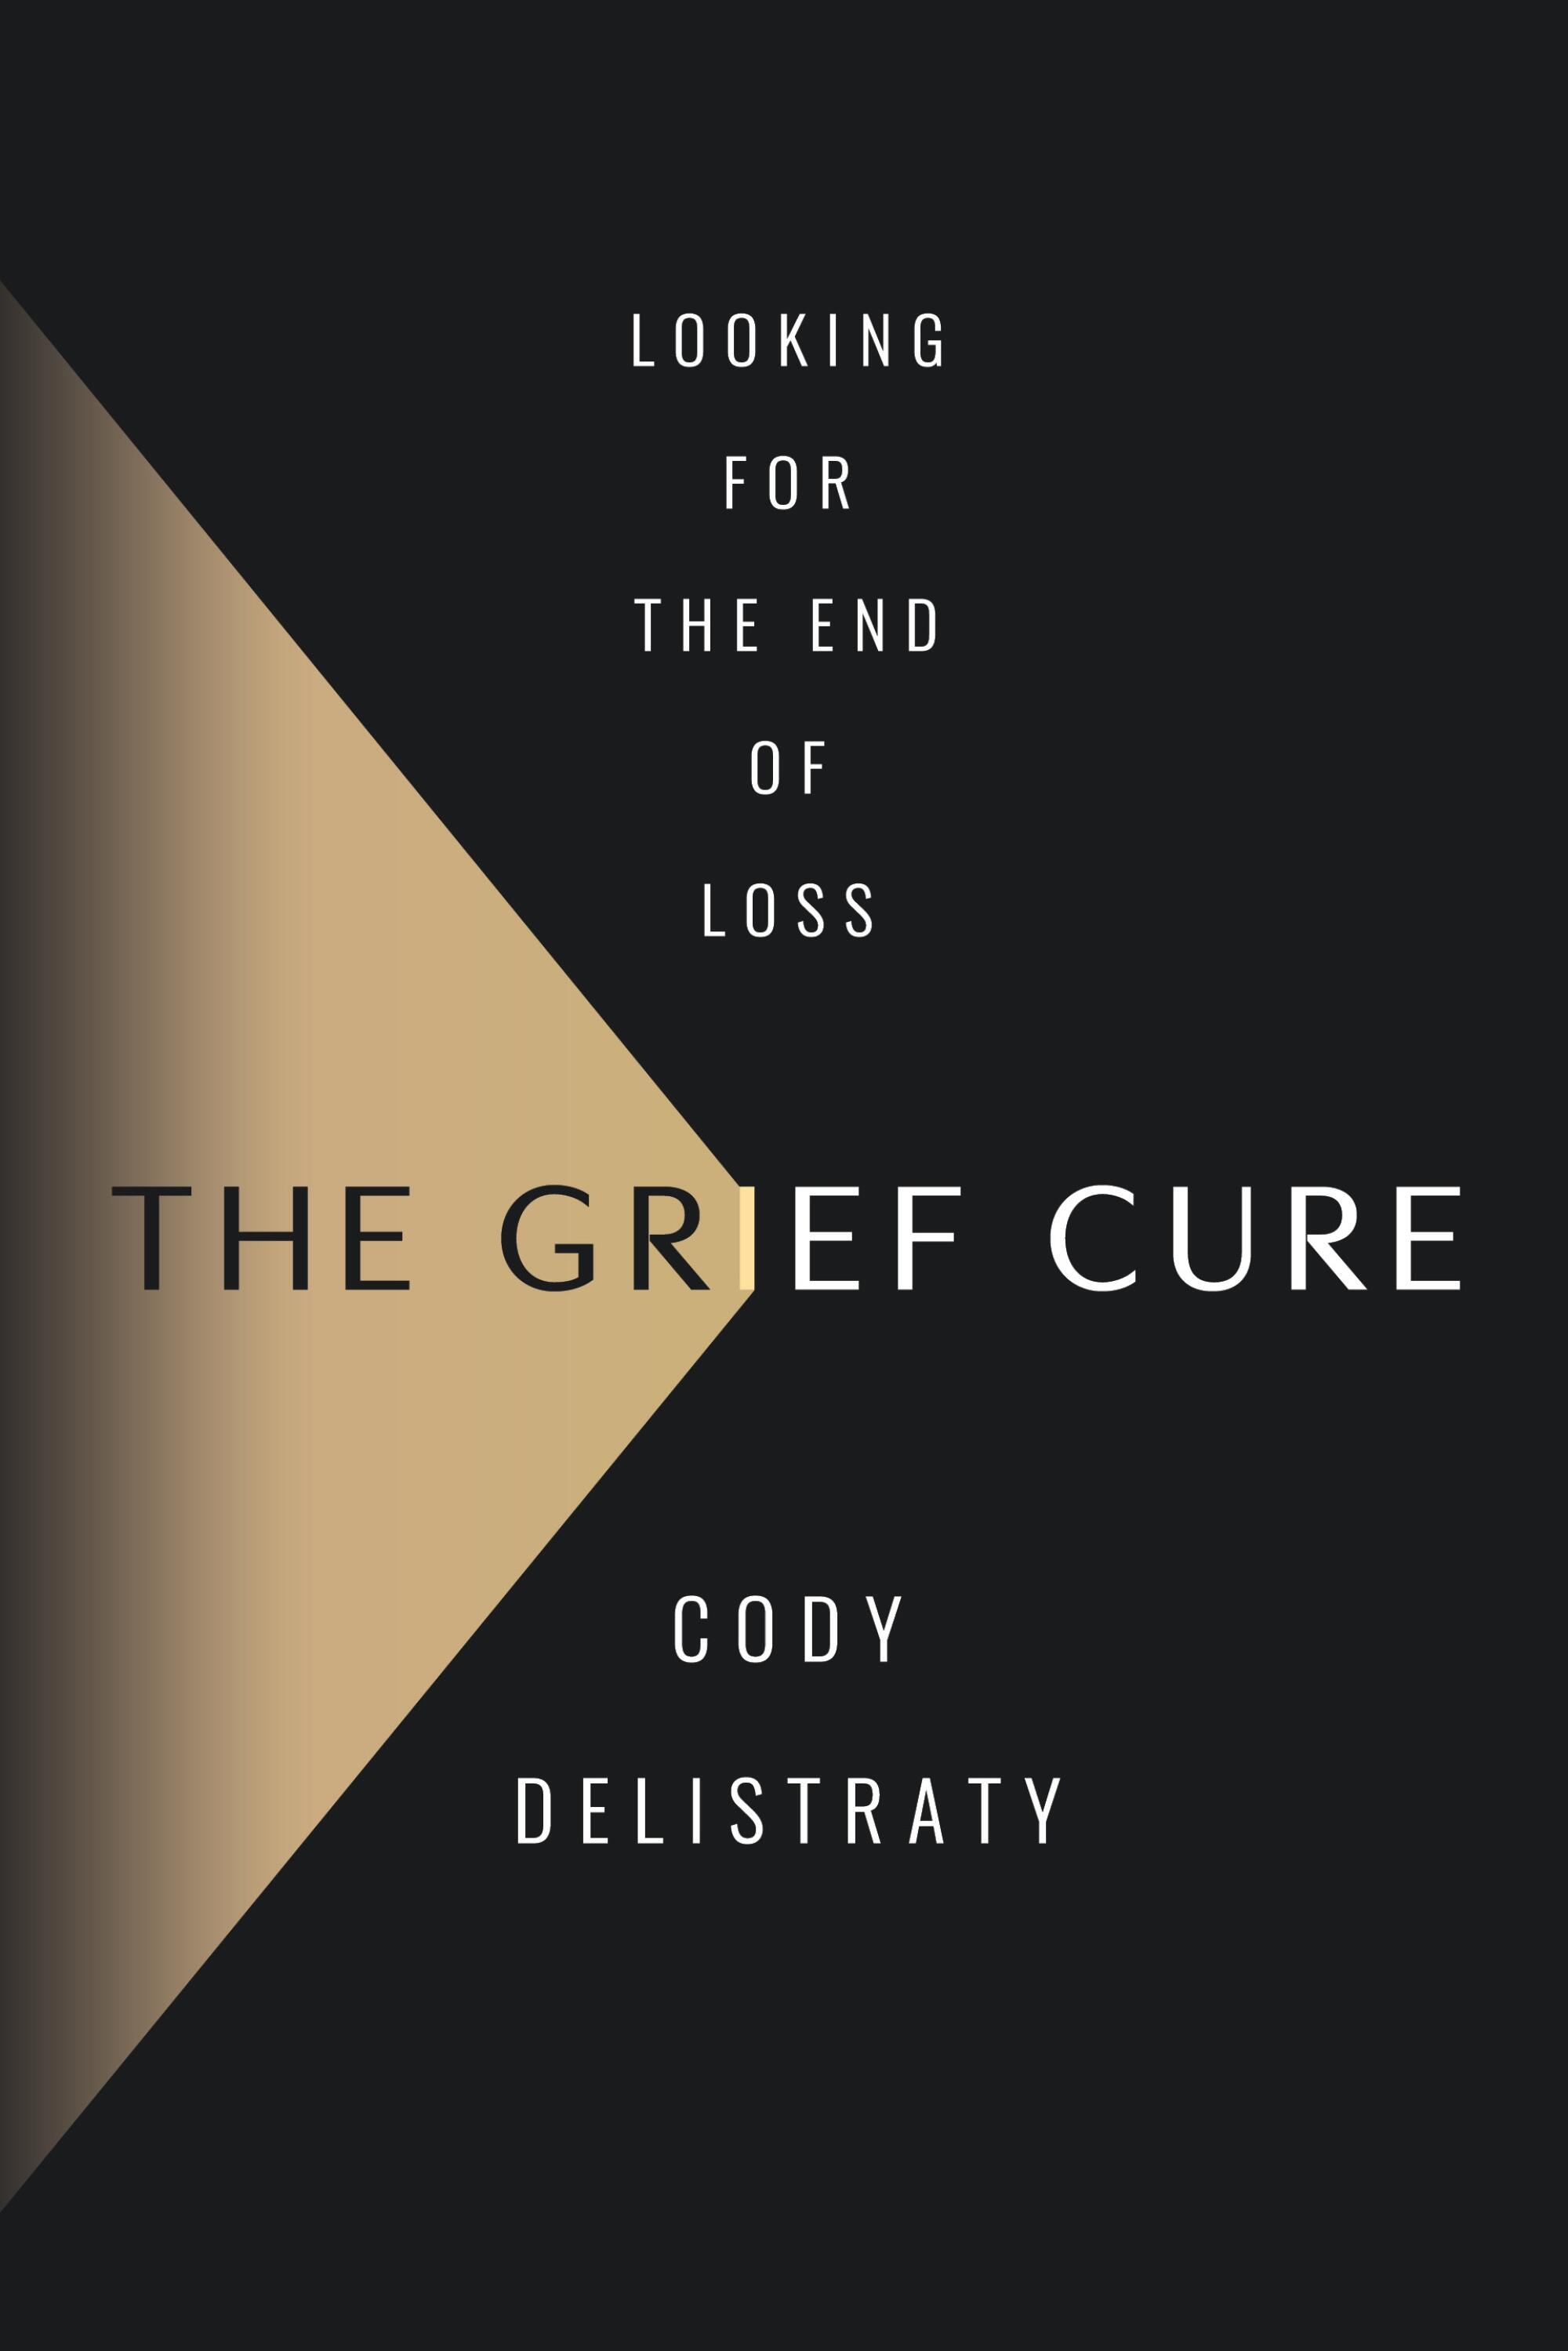 Book jacket for "The Grief Cure" by Cody Delistraty